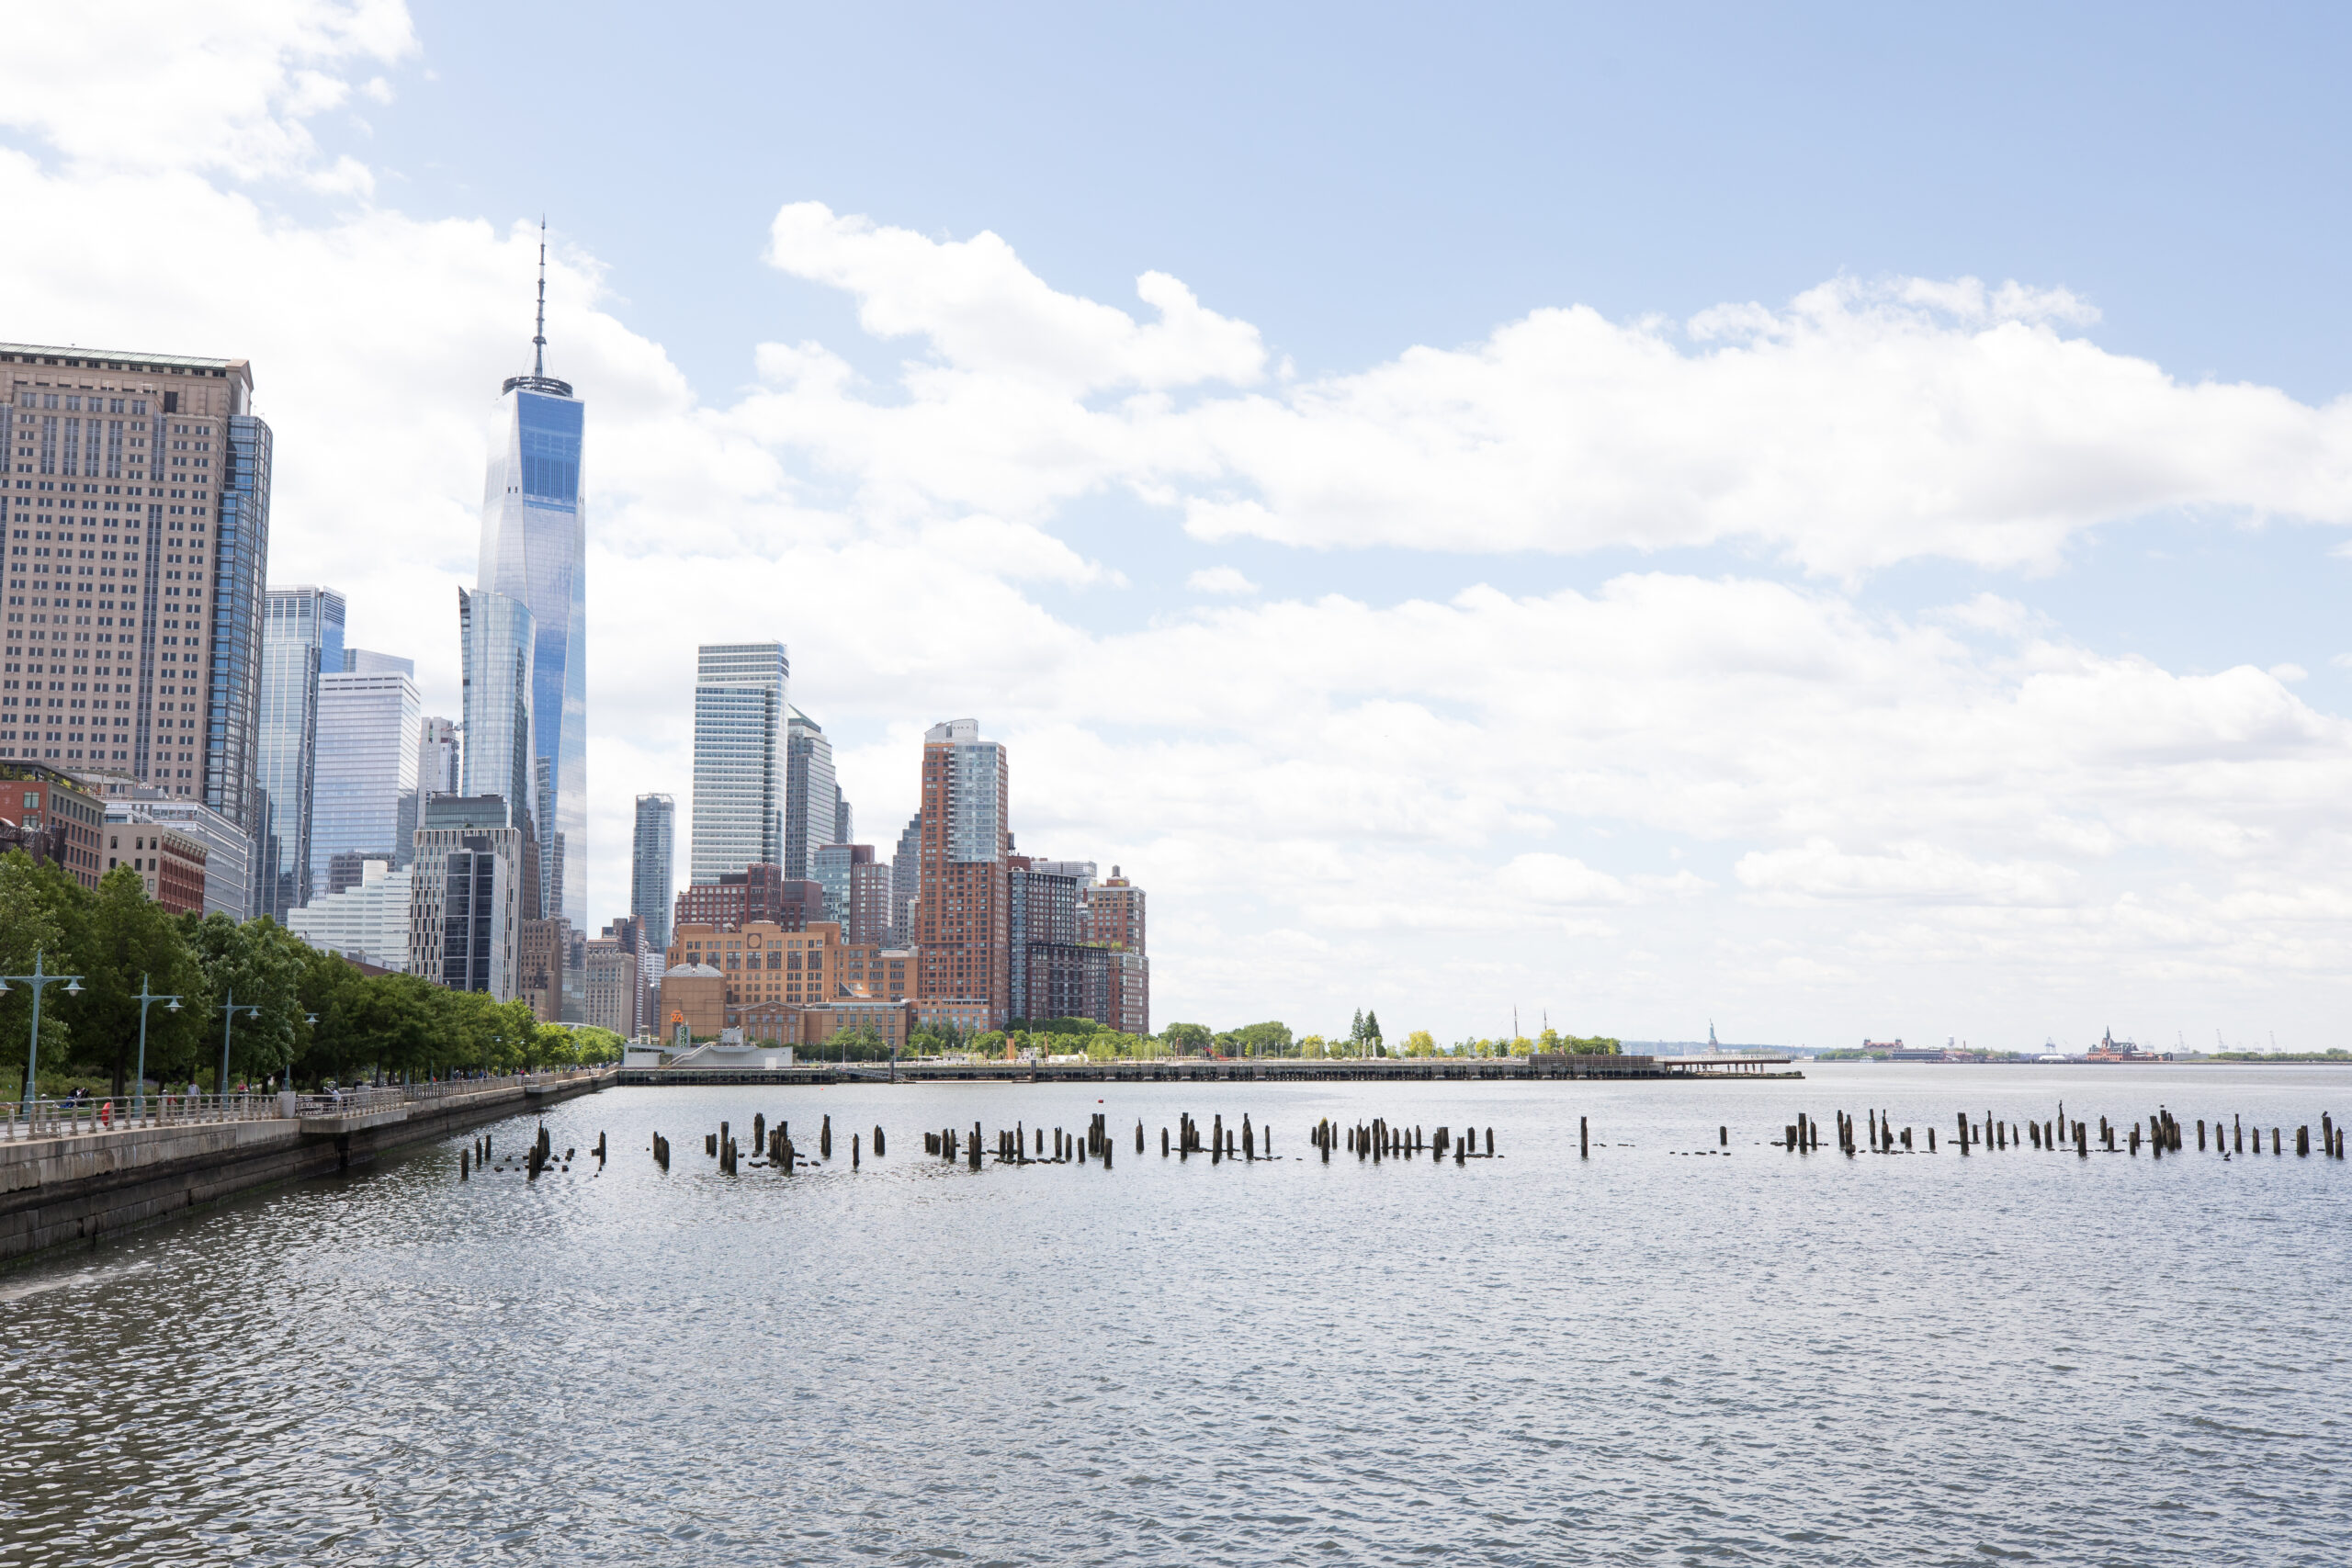 The pile field at Pier 34 in Hudson River Park. One World Trade Center is visible in the distance.